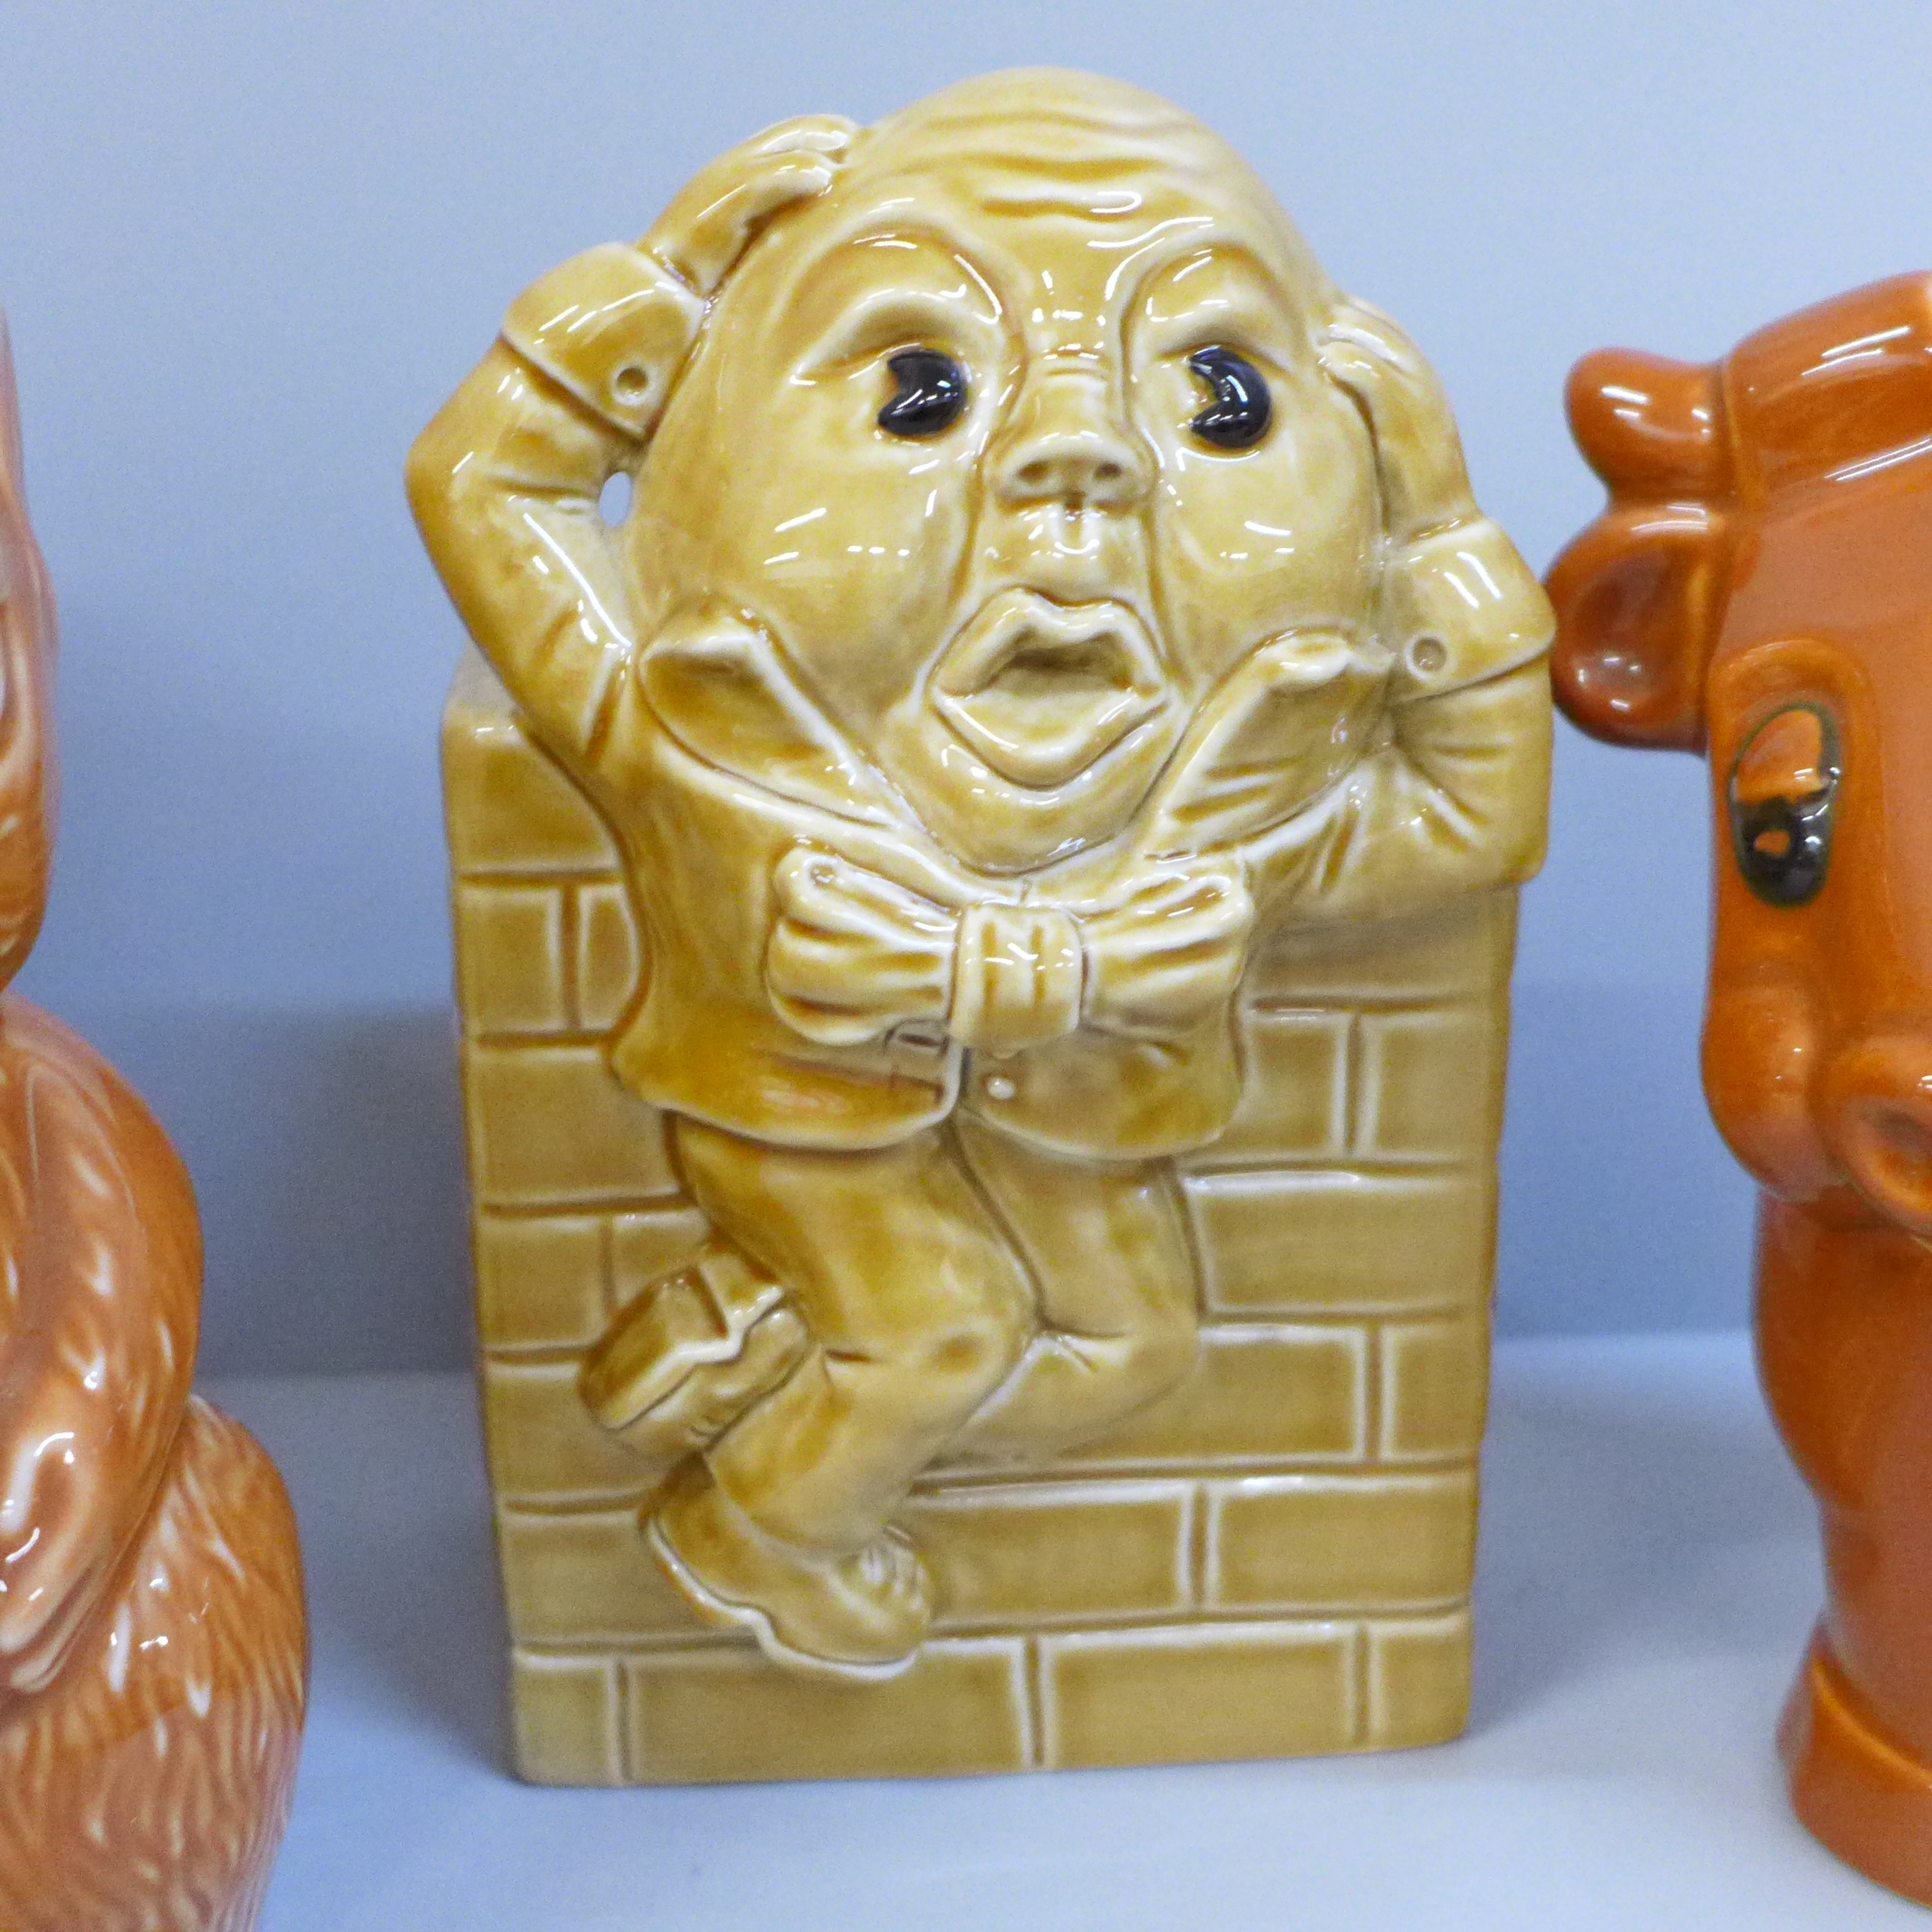 Three Wade money boxes; Humpty Dumpty, cow and squirrel - Image 2 of 3